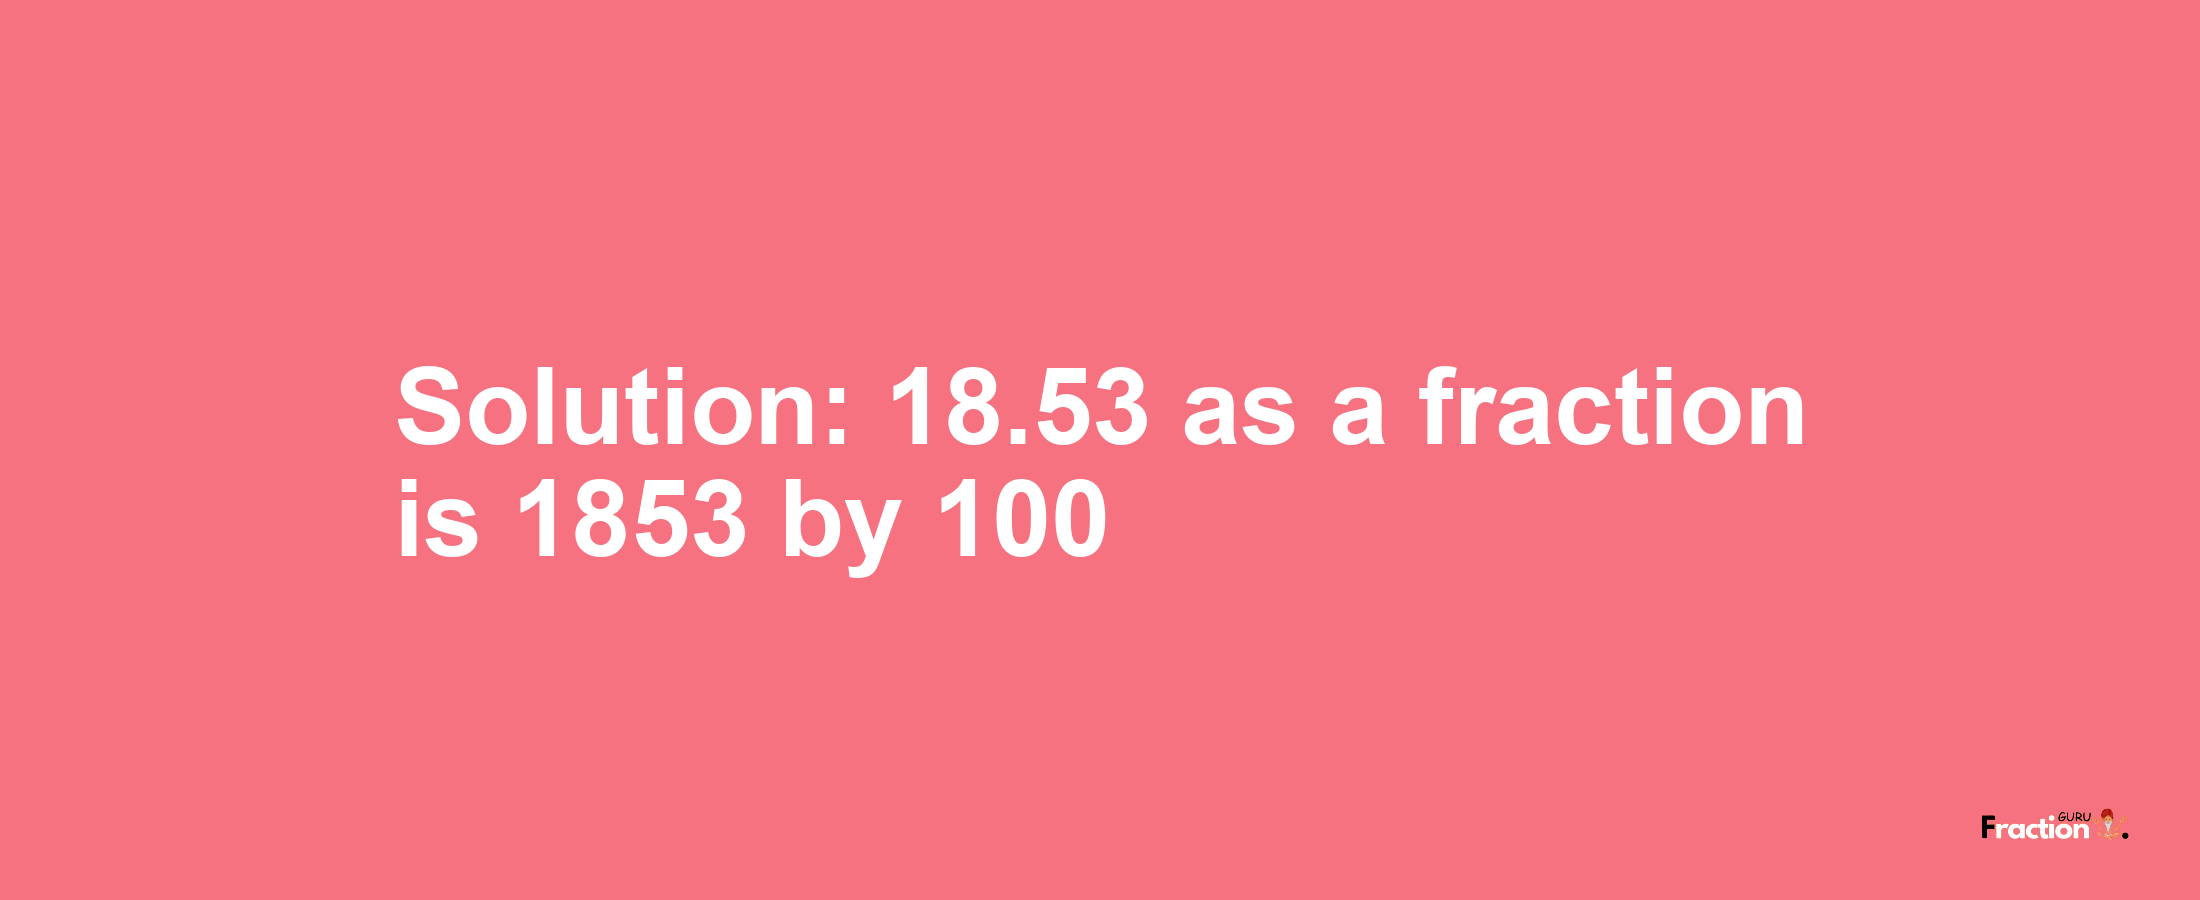 Solution:18.53 as a fraction is 1853/100